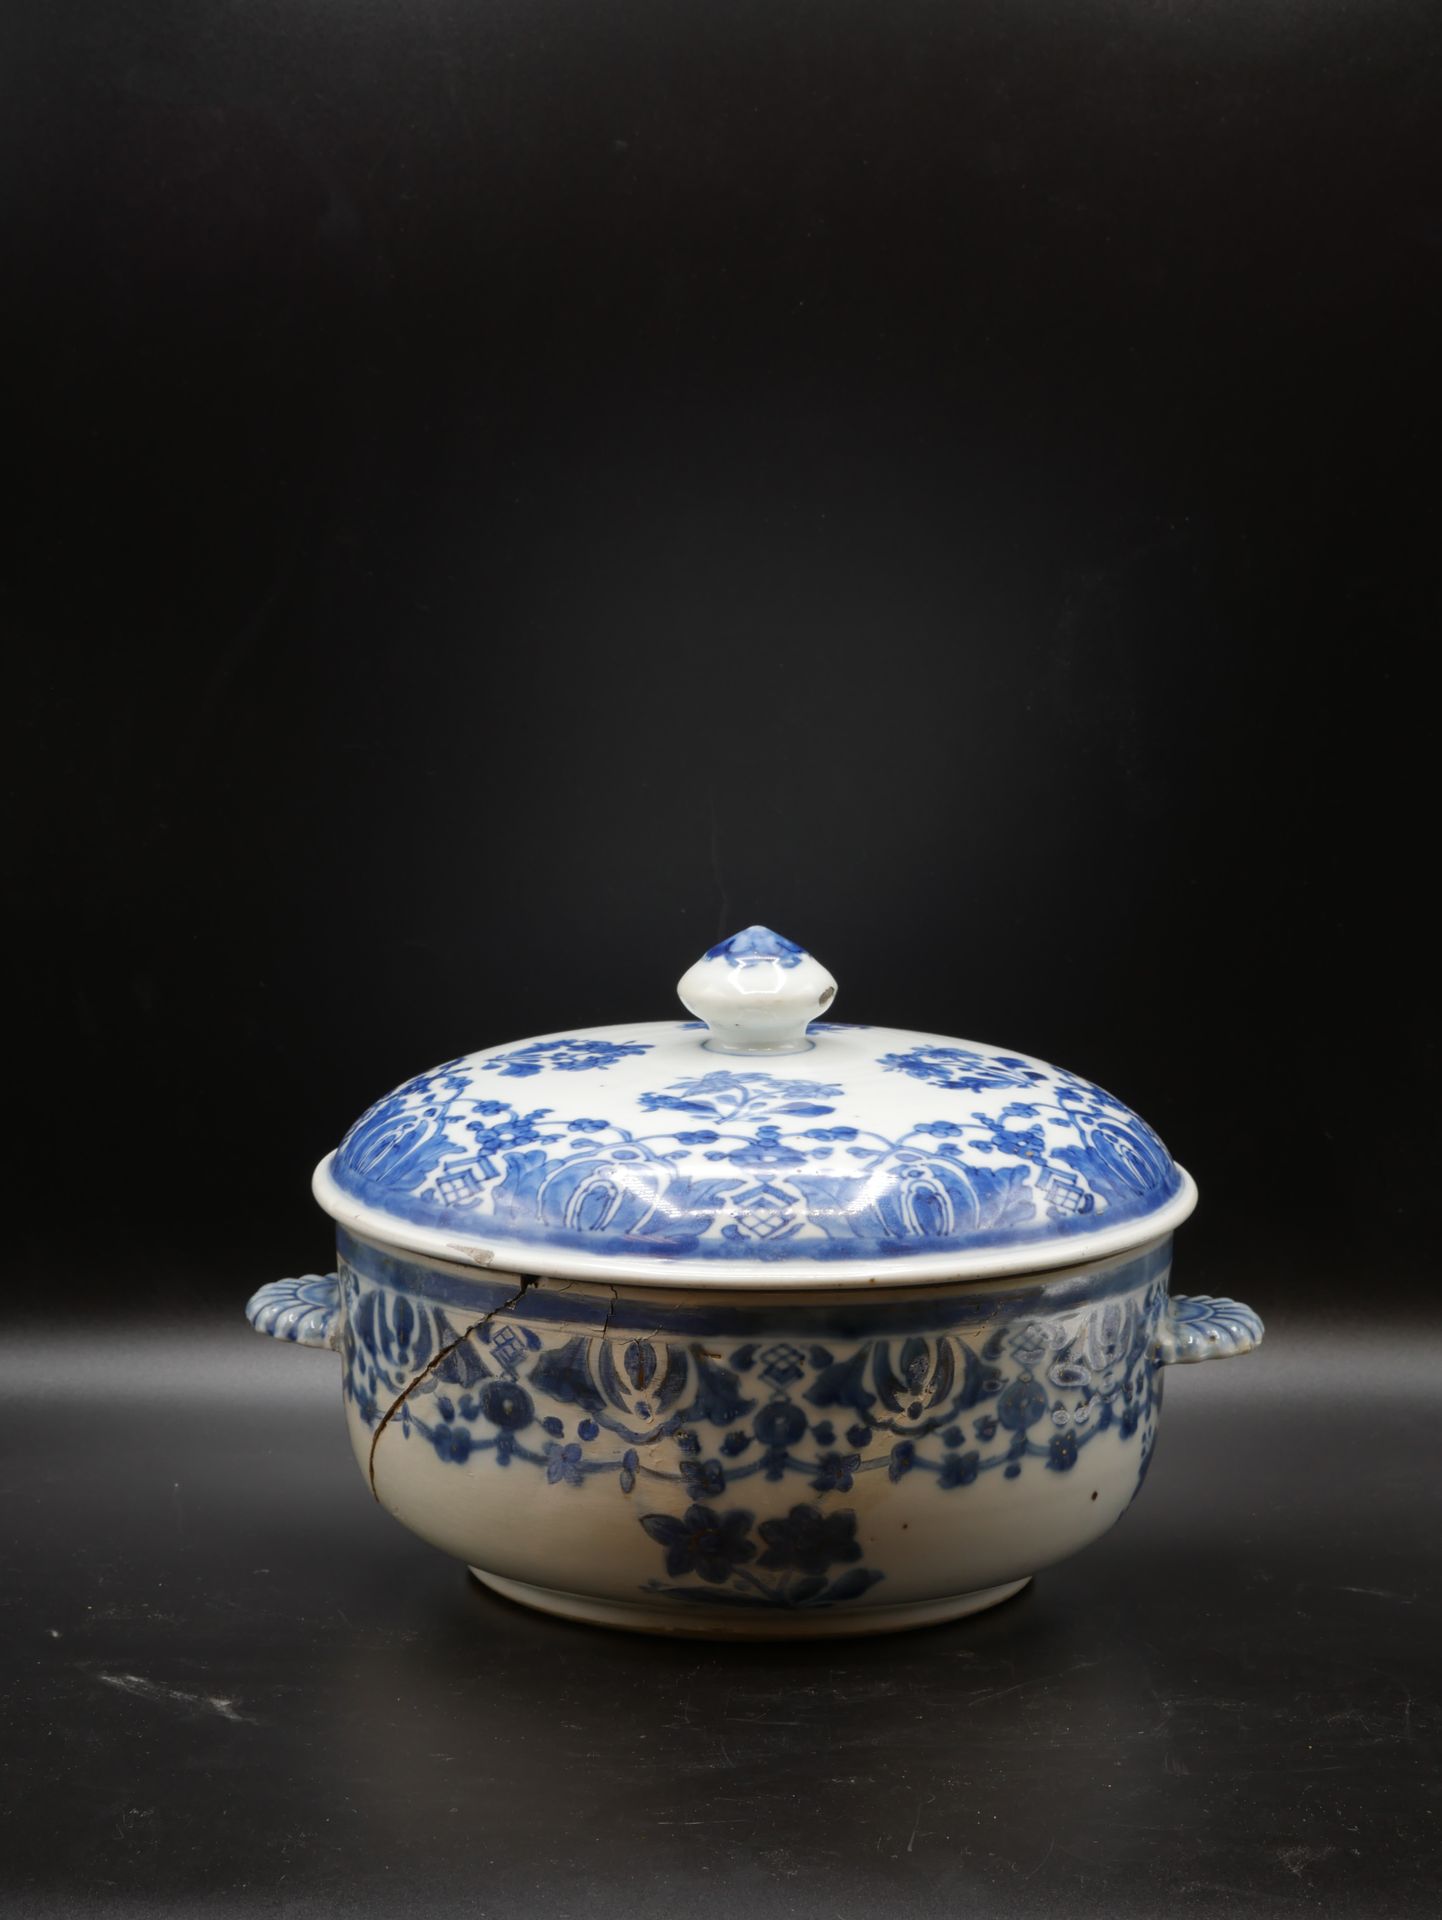 Null 
CHINA, 19th century for export. Soup tureen decorated with friezes, foliag&hellip;